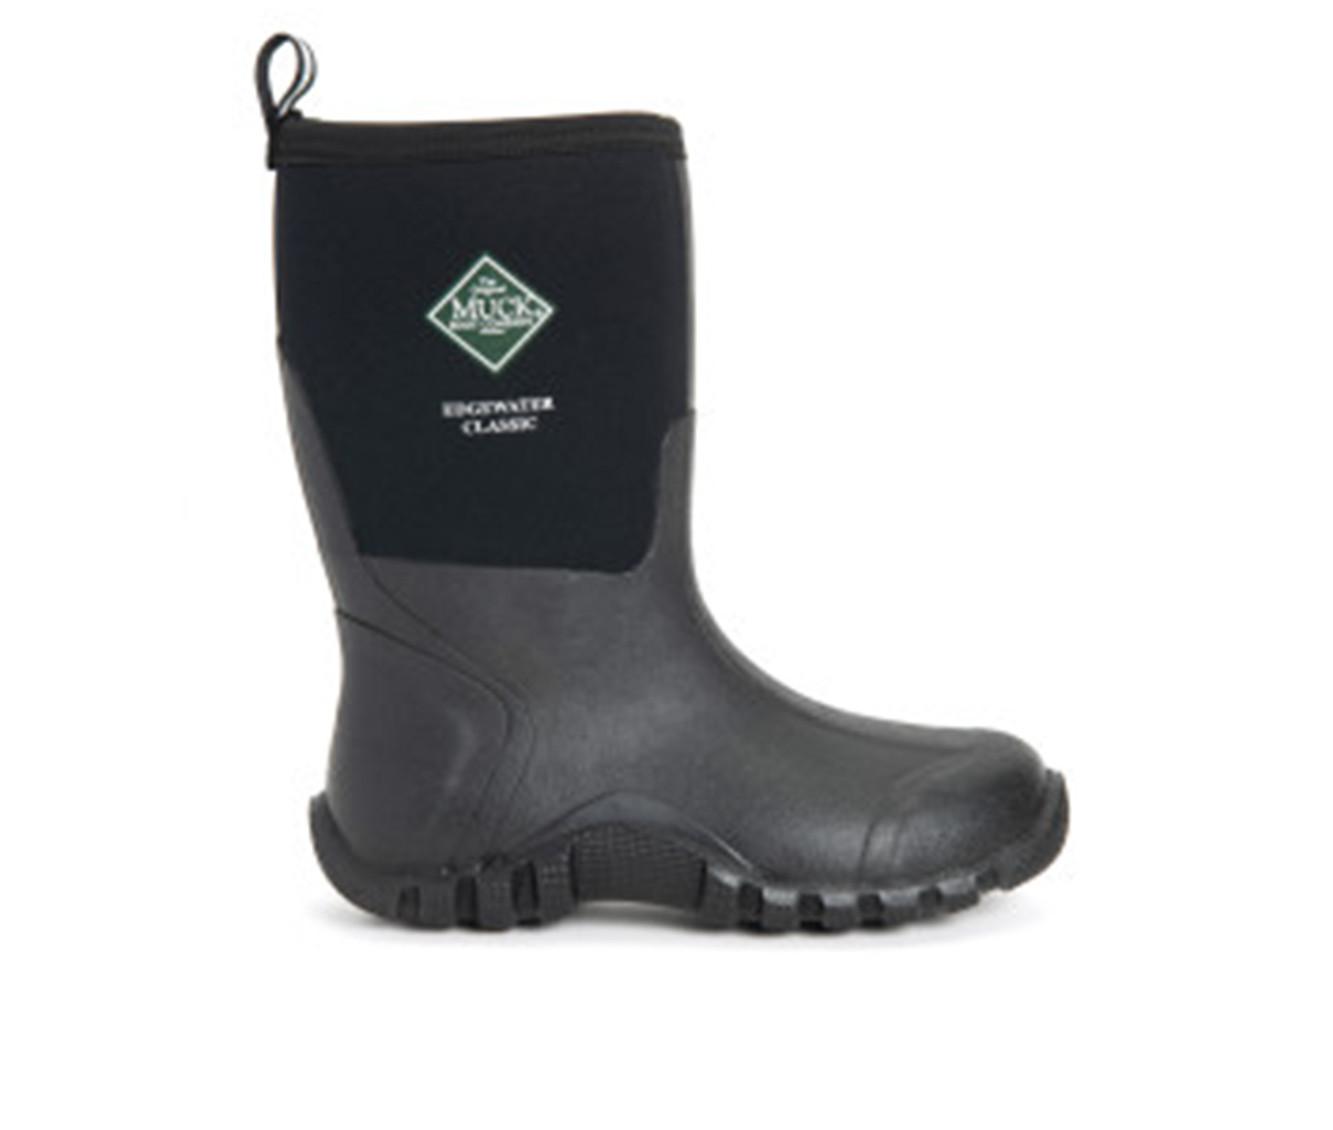 Men's Muck Boots Edgewater Classic Mid Work Boots